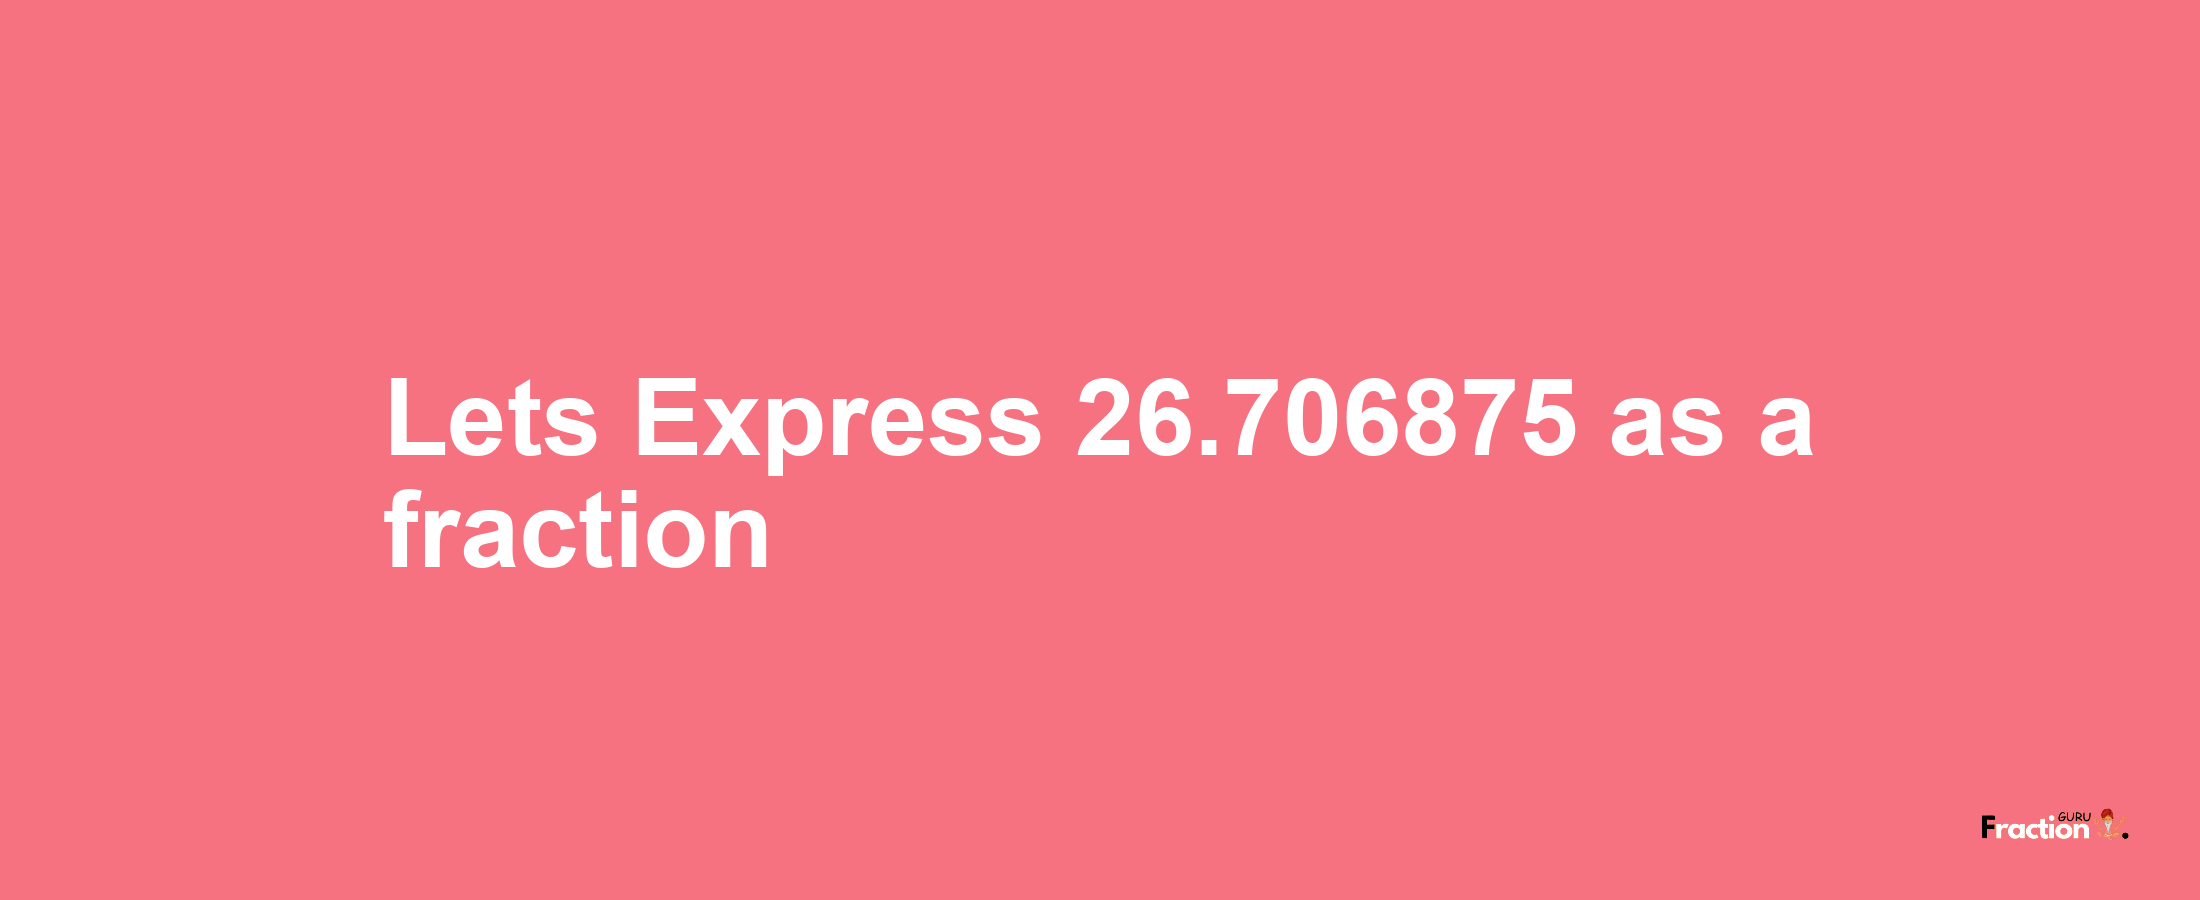 Lets Express 26.706875 as afraction